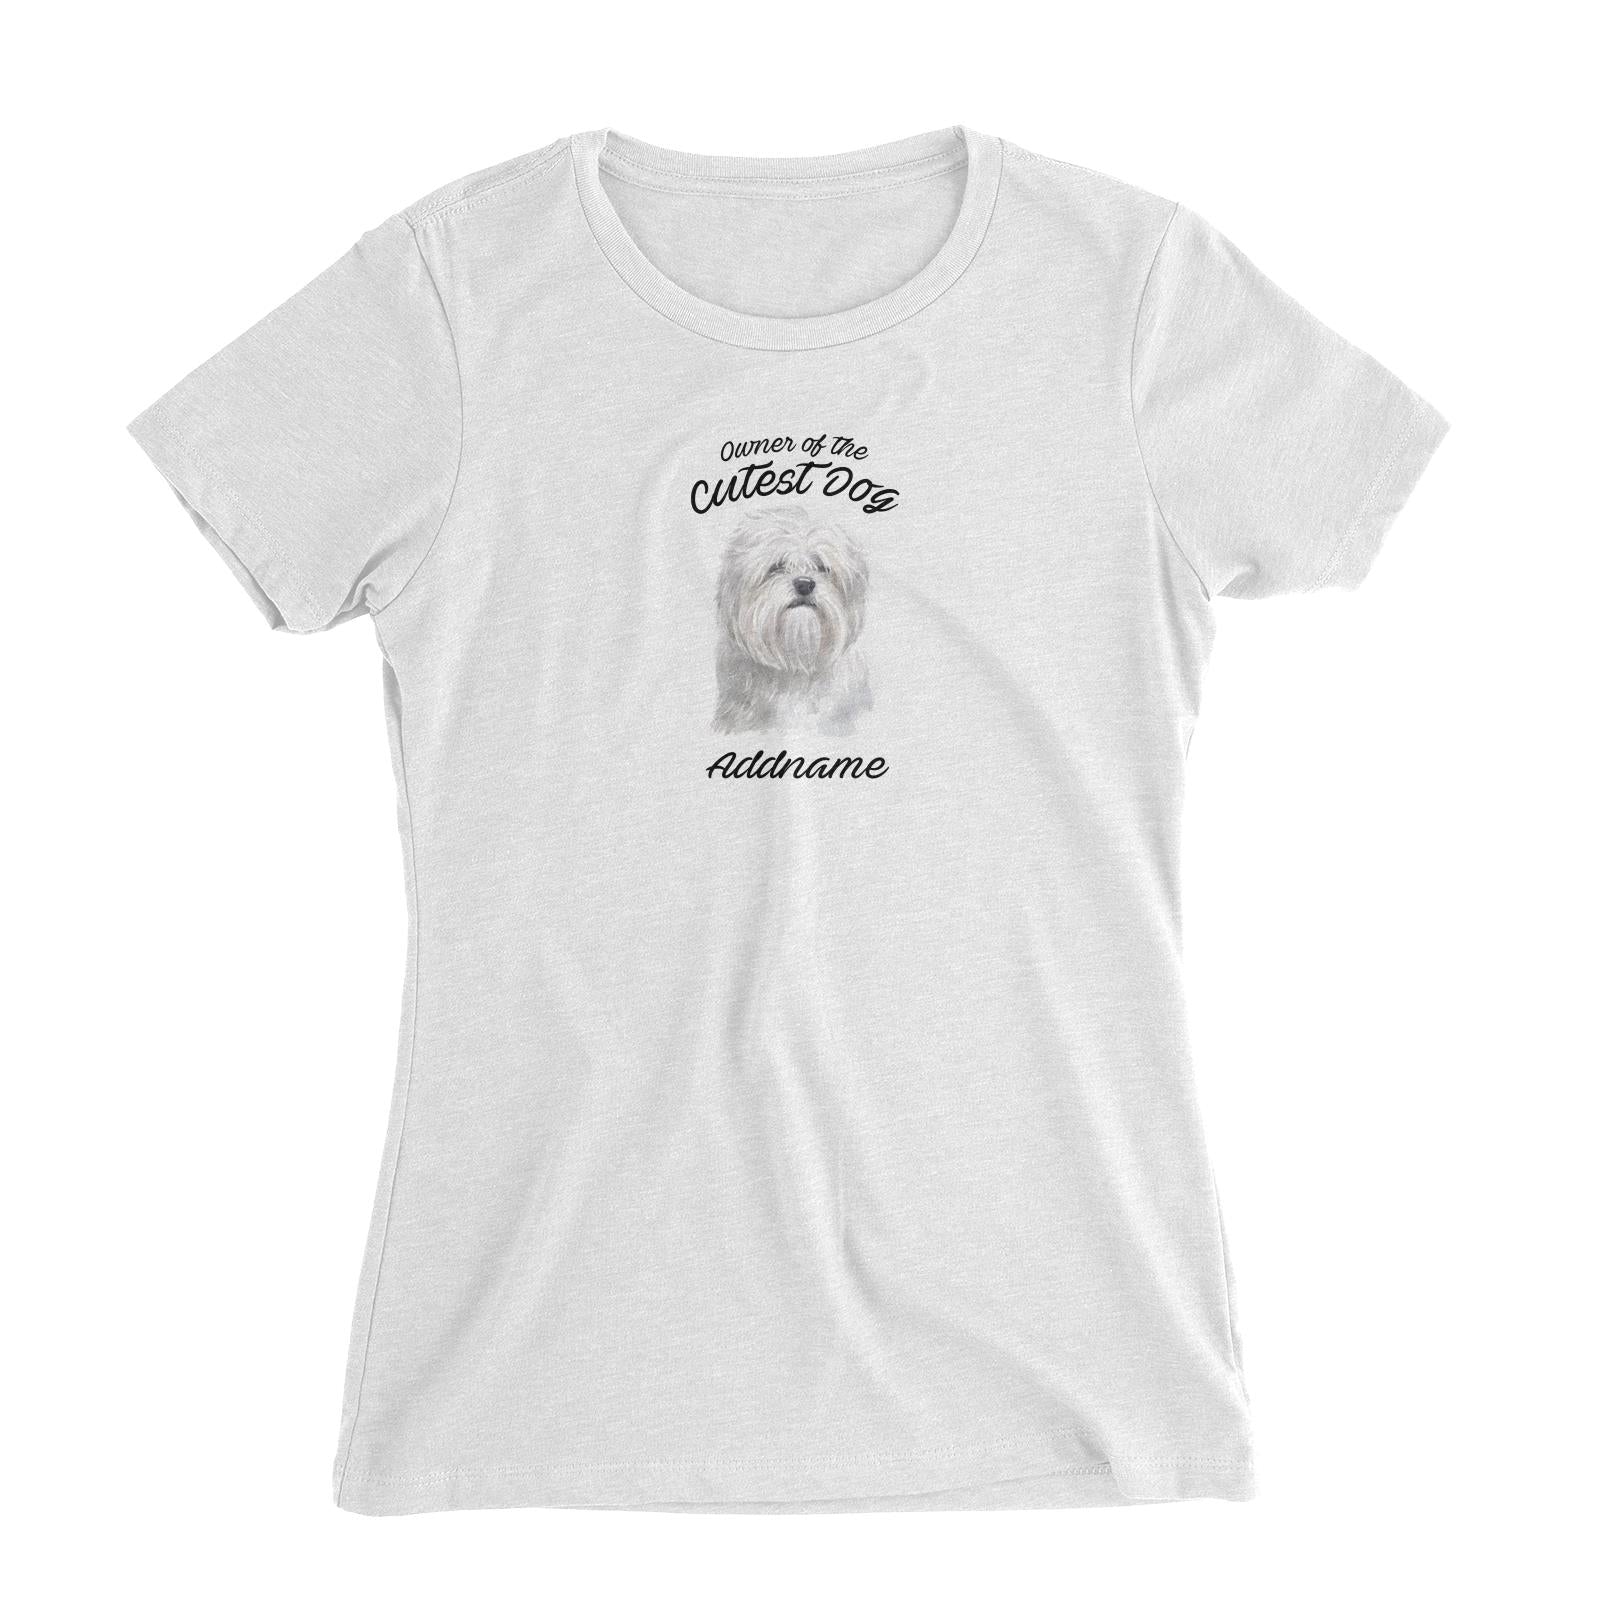 Watercolor Dog Owner Of The Cutest Dog Lhasa Apso Addname Women's Slim Fit T-Shirt